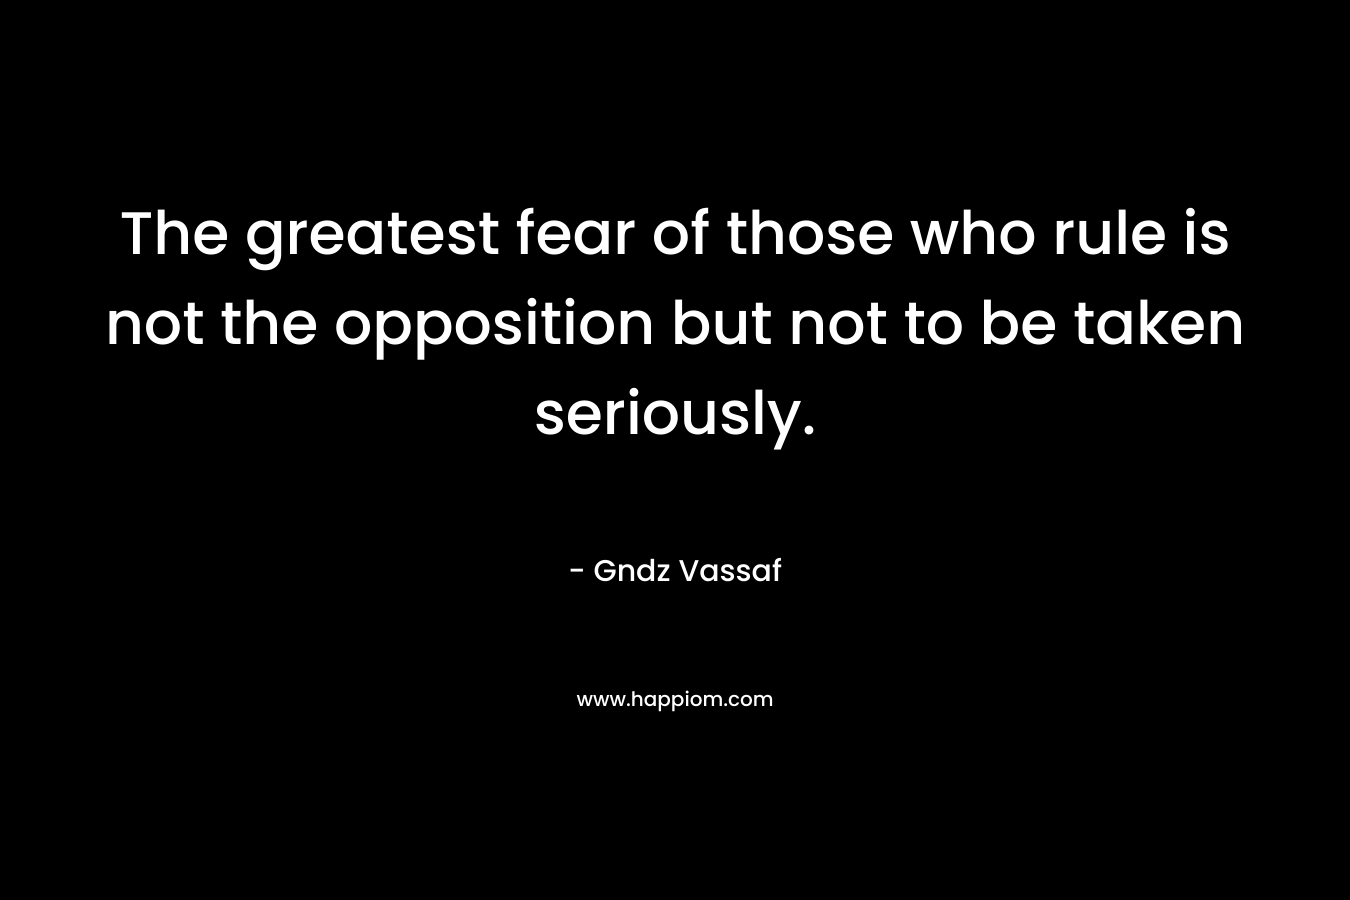 The greatest fear of those who rule is not the opposition but not to be taken seriously. – Gndz Vassaf